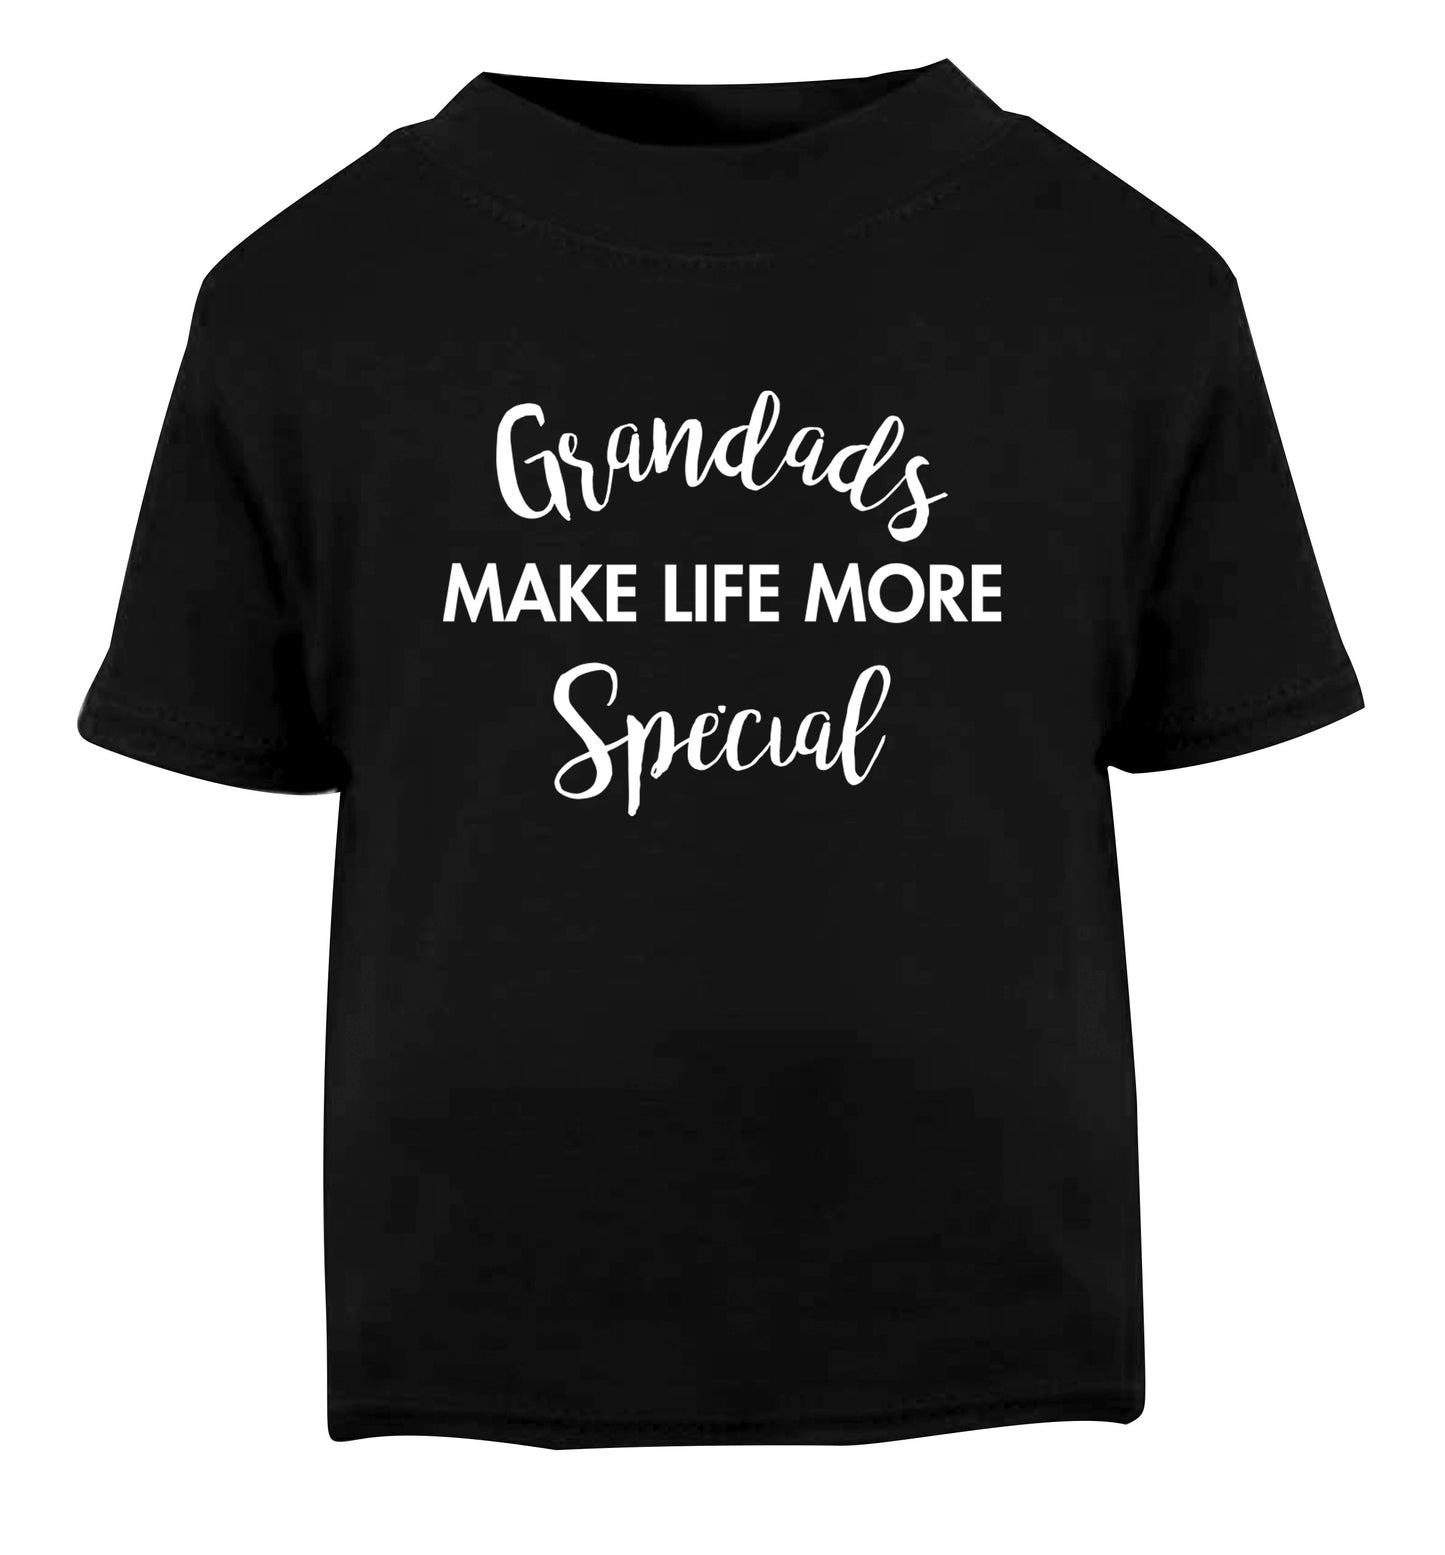 Grandads make life more special Black Baby Toddler Tshirt 2 years